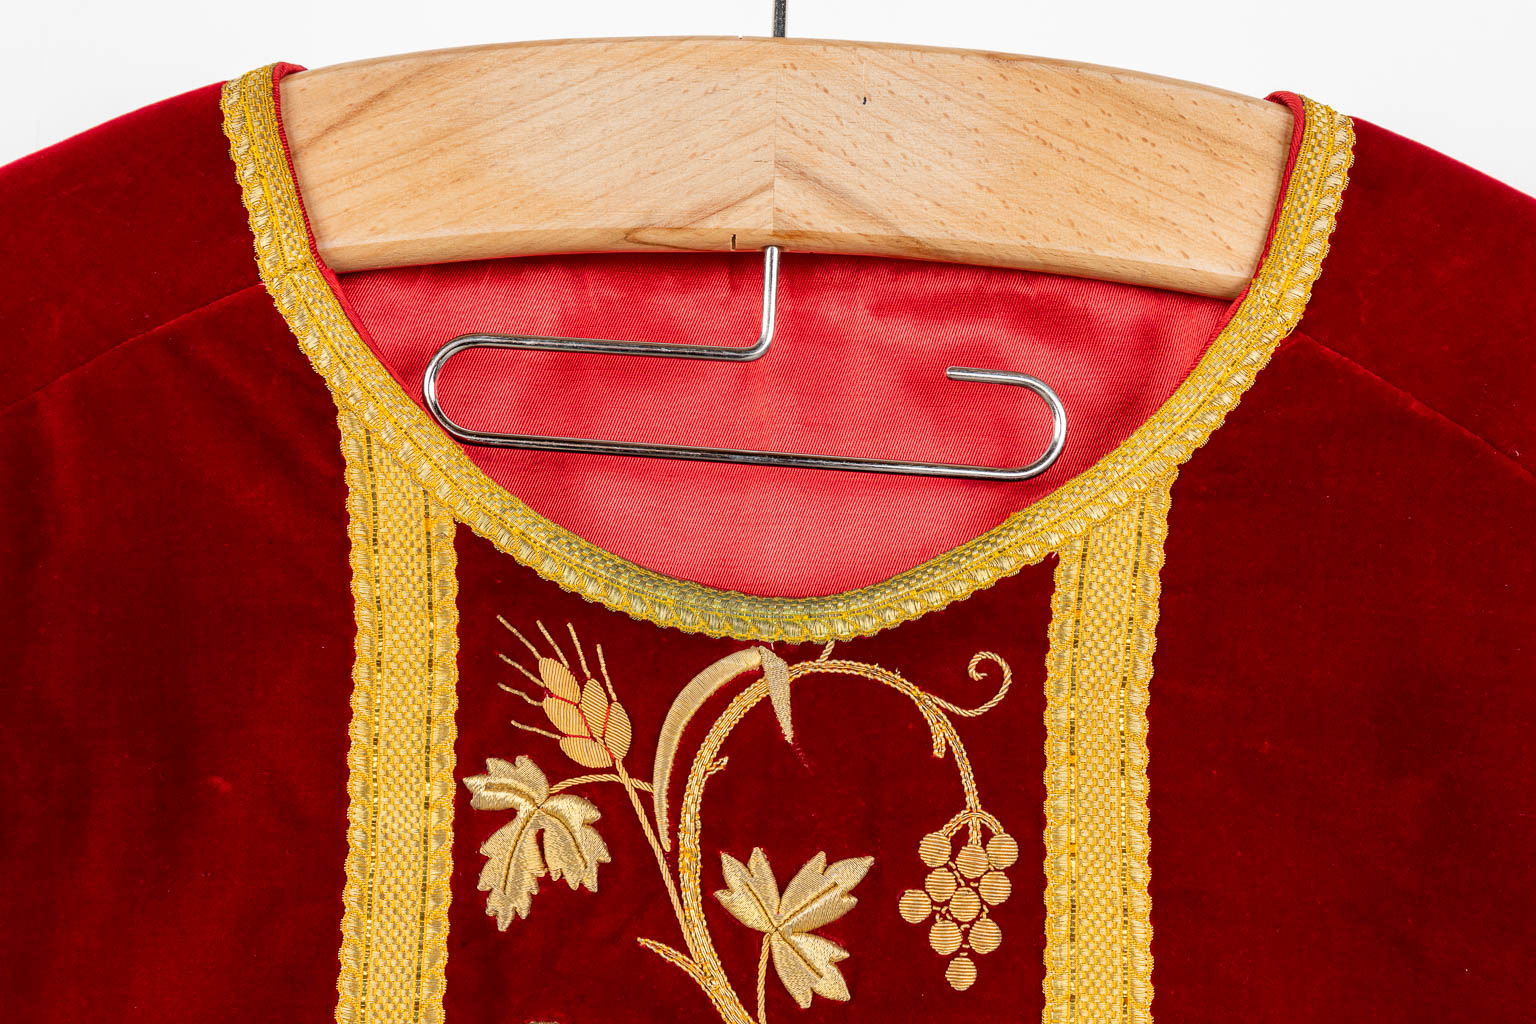 Two Roman Chasubles and stola, red fabric with thick gold thread embroideries.